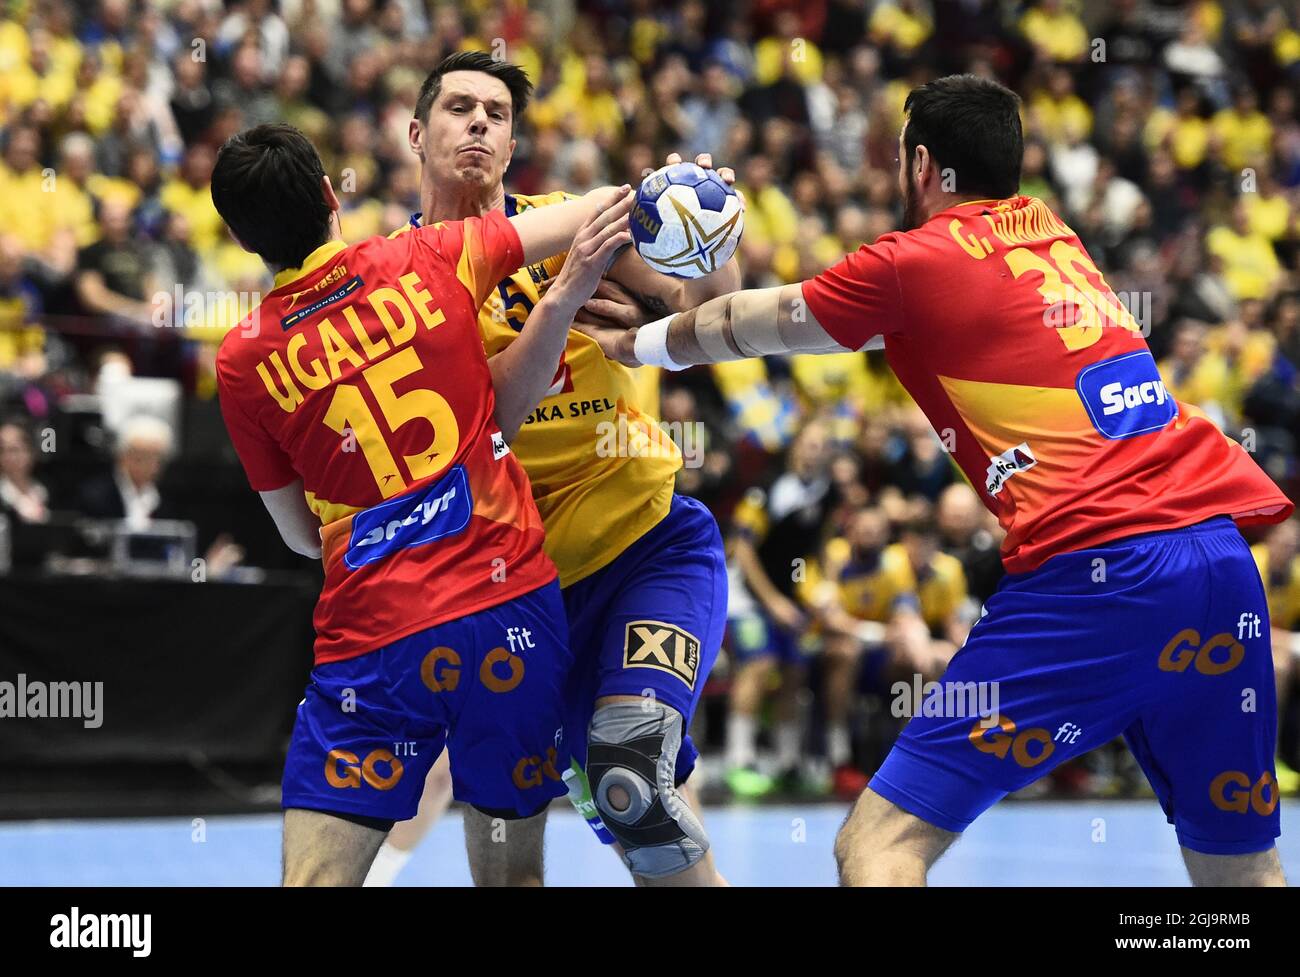 Swedens Kim Andersson stoped by Spain's Cristian Ugalde and Gedeon Guardiola during Sunday April 10, 2016 men's handball Olympic Qualification Tournament group 2 between Sweden and Spain in Malmo. Photo Emil Langvad / TT Stock Photo